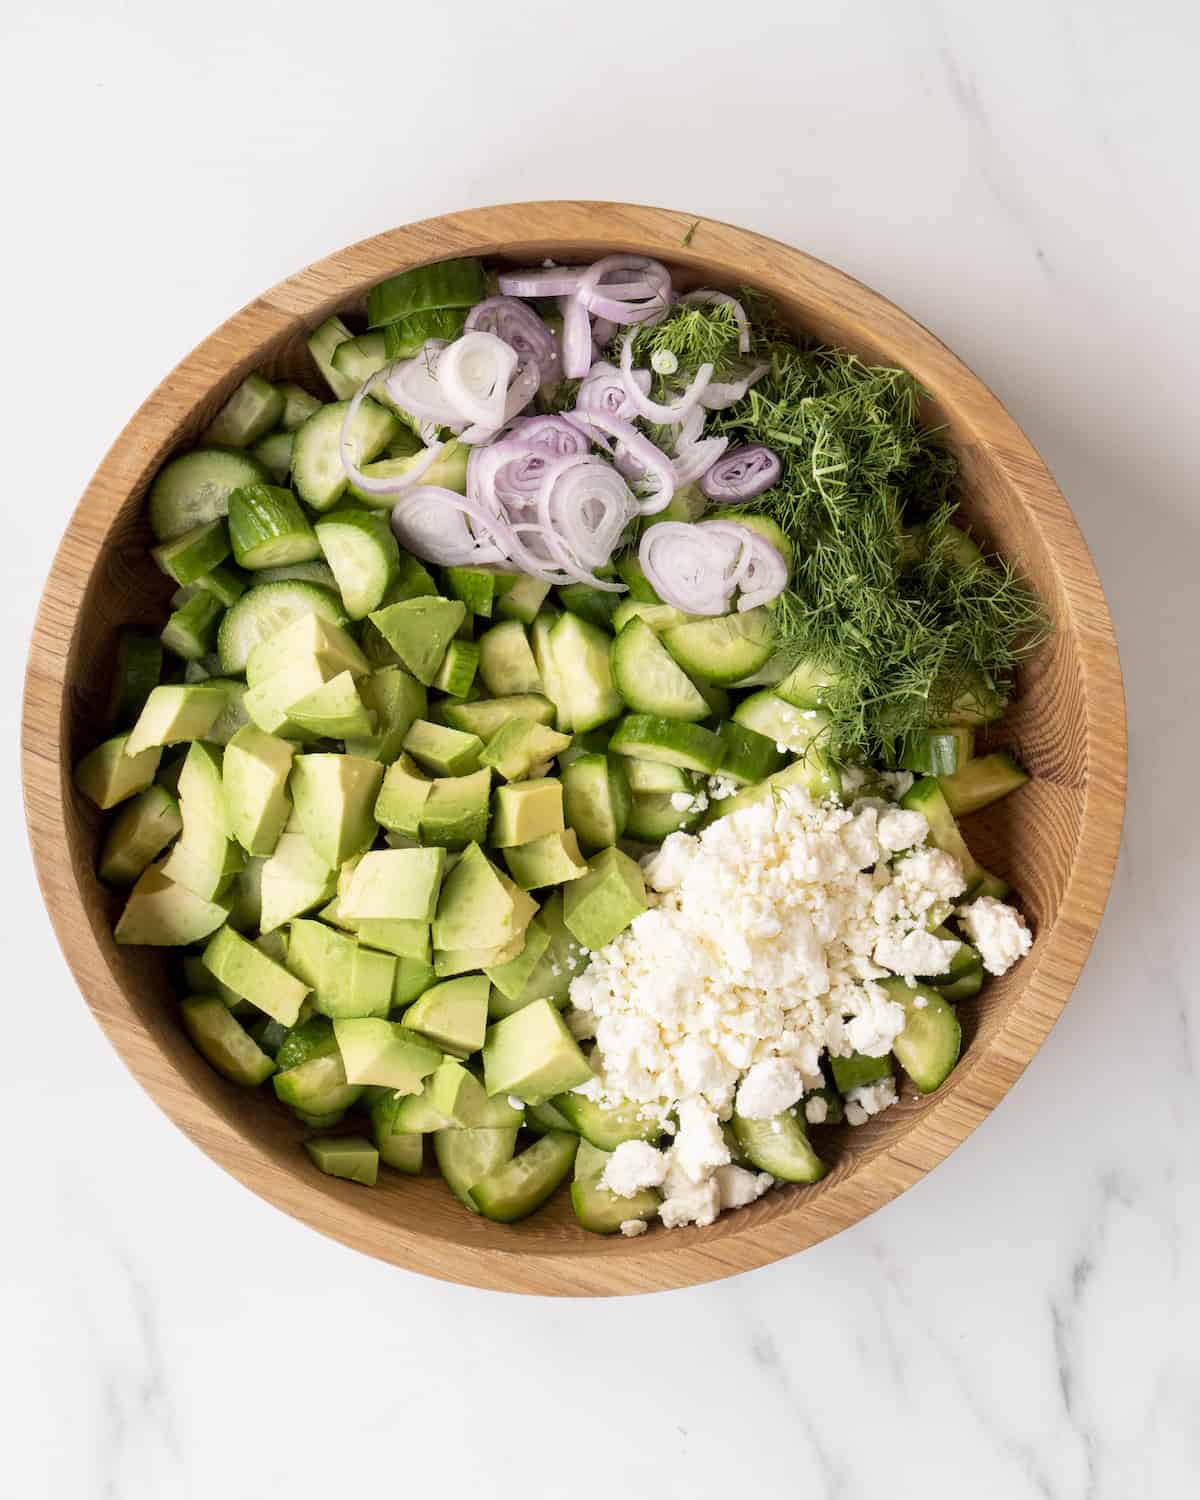 A wooden mixing bowl with chopped up cucumber and avocado, feta cheese, dill and sliced shallots.